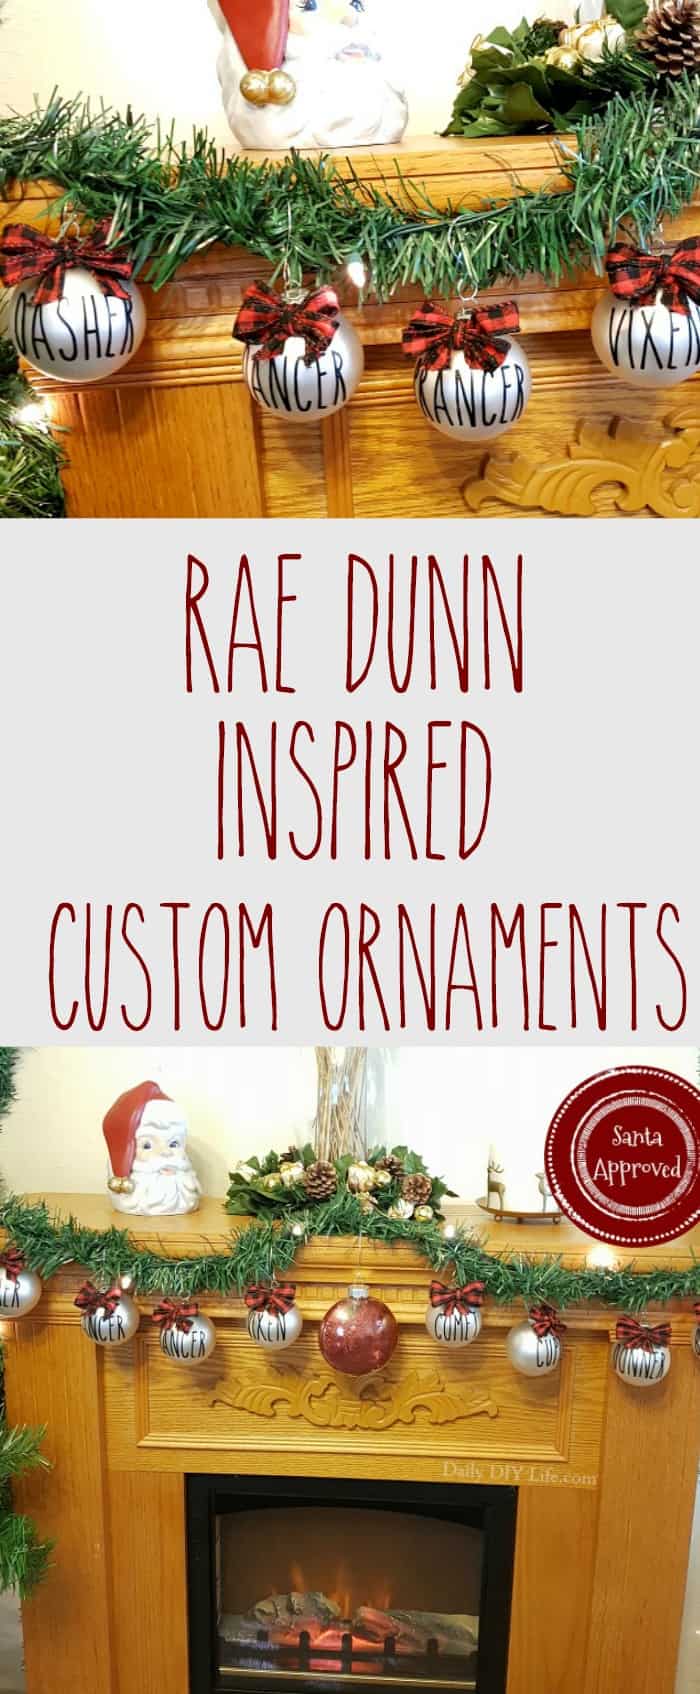 Rae Dun Inspired Custom Ornaments. Rudolph and his 8 tiny reindeer, displayed beautifully along my fireplace mantel. Buffalo plaid bows add just the right amount of Country Christmas style to complete the look. #Christmas #DIYChristmas #RaeDunnInspired #CustomOrnaments